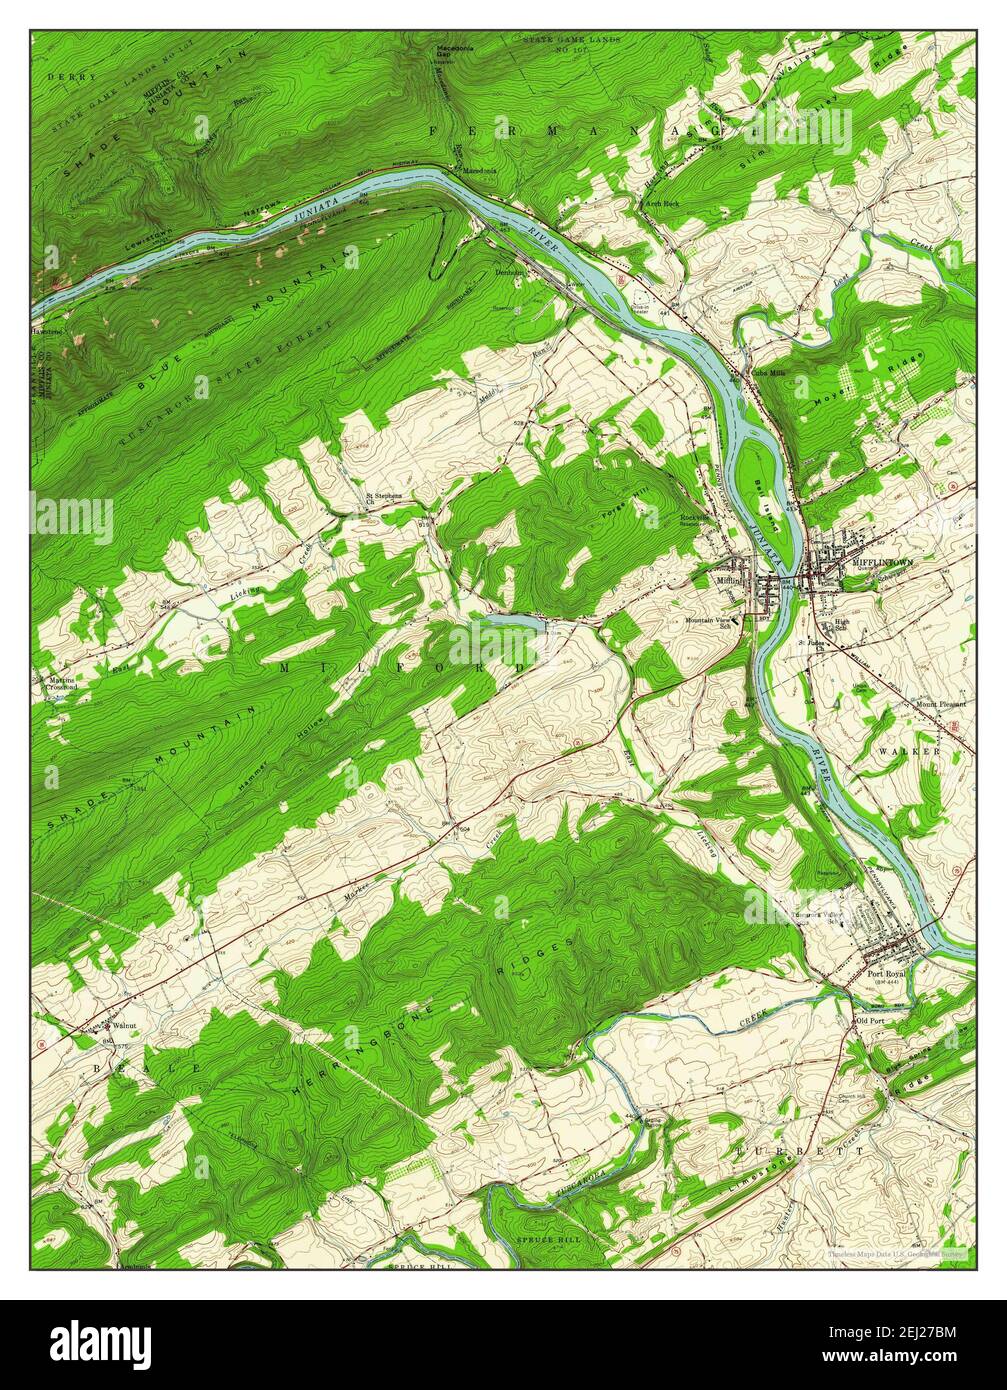 Mifflintown, Pennsylvania, map 1959, 1:24000, United States of America by Timeless Maps, data U.S. Geological Survey Stock Photo